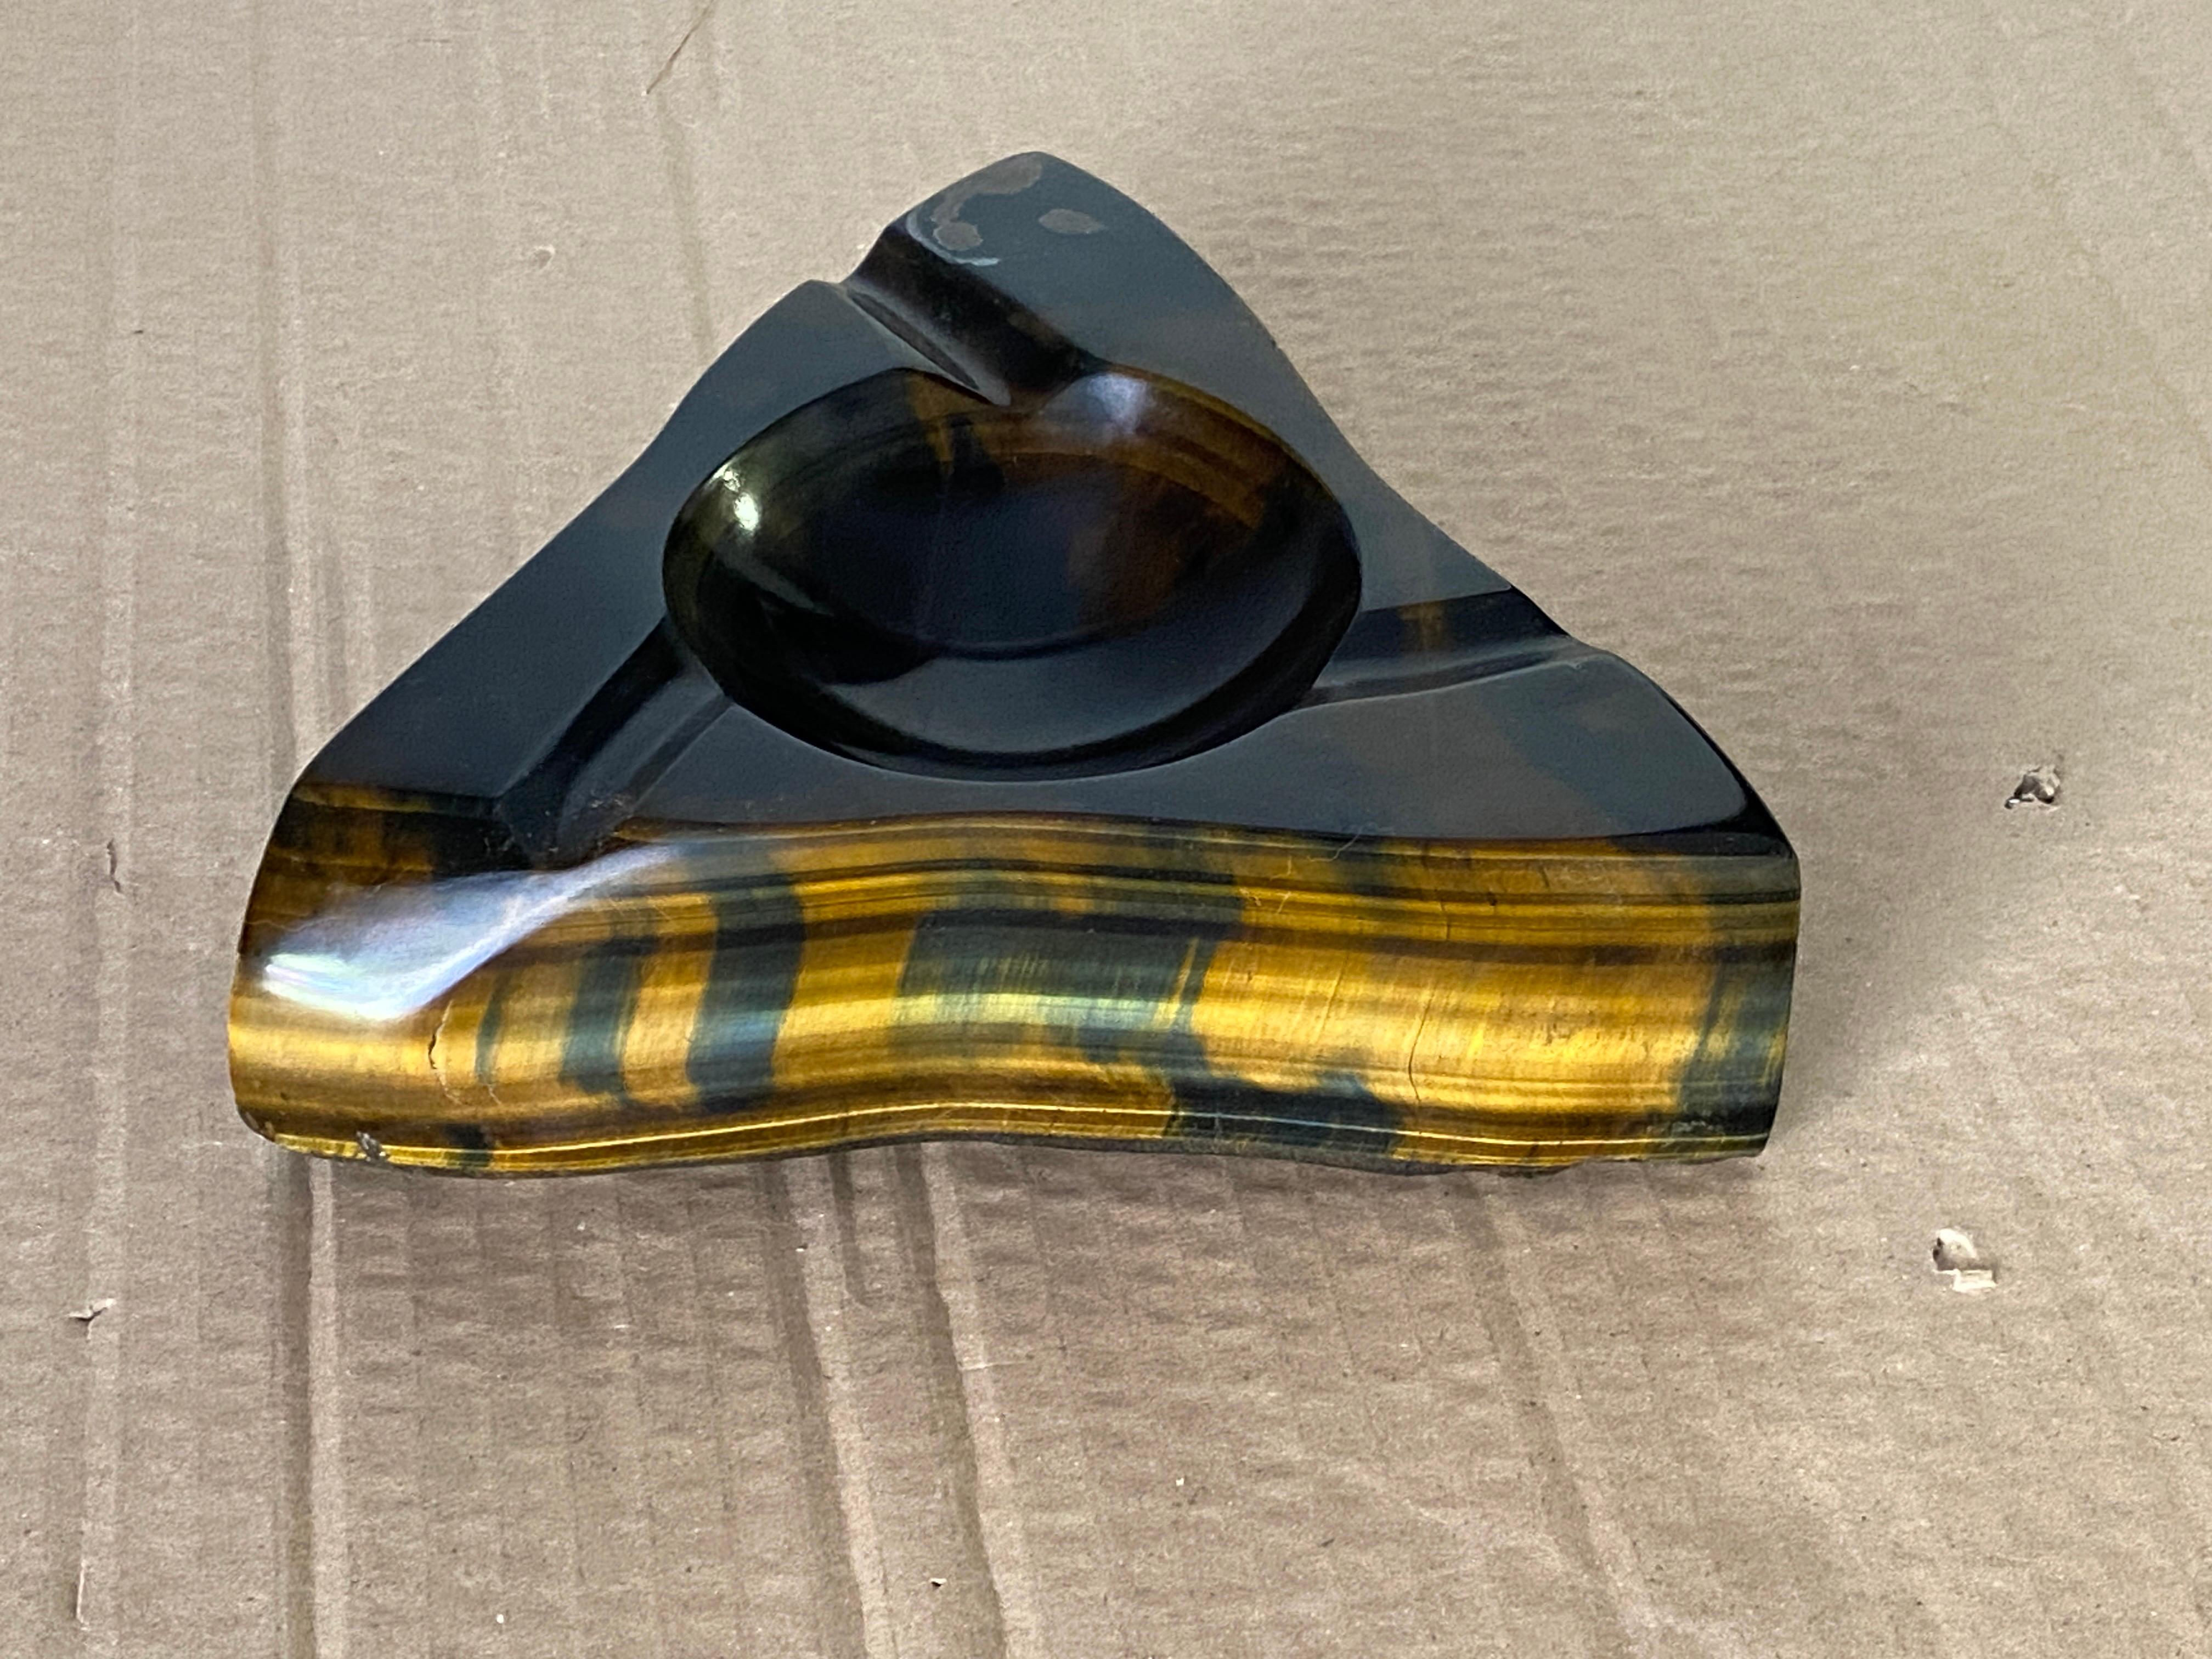 Solid tiger eye stone ashtray, polished, from South Africa. 
Tiger's eye is a mineral with a silky lustre and distinctive red-brown golden coloring. In the 16th century it was more precious than gold, often used as eyes in deity statues, also worn